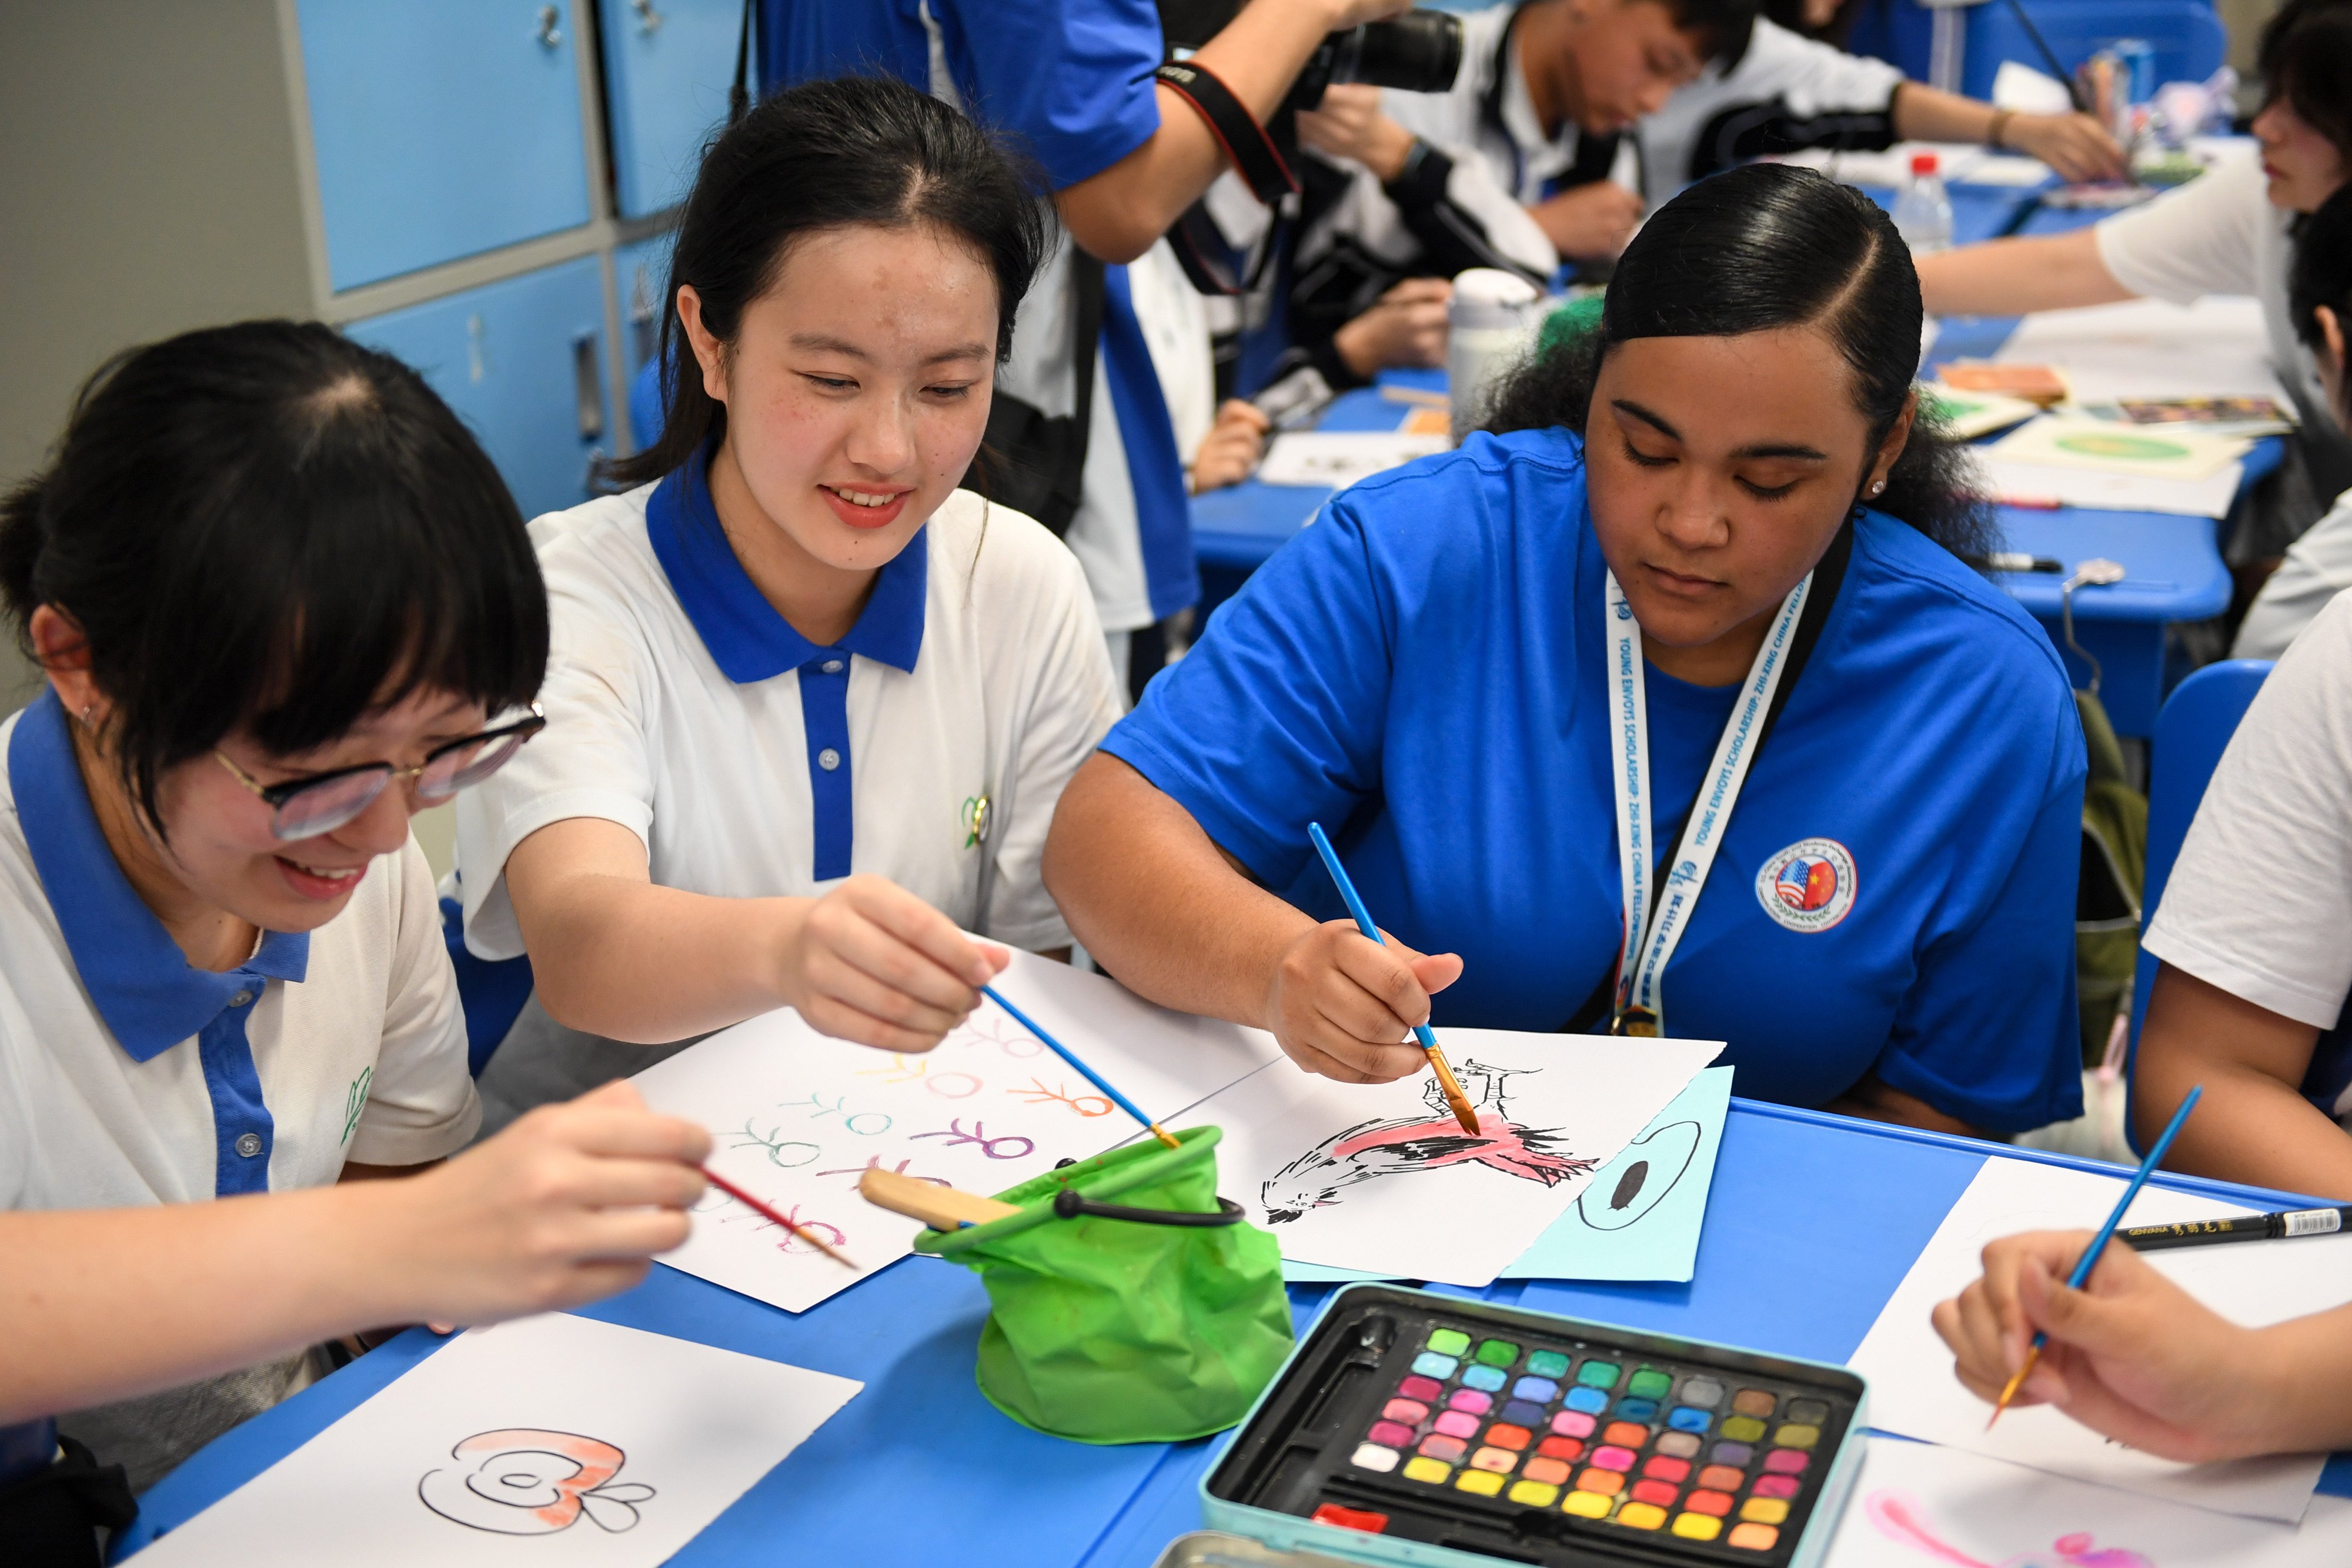 Members of an American high school delegation from the US state of Washington experience Chinese academic life at Shenzhen Nanshan Foreign Language Senior High School in Shenzhen, Guangdong province, on March 25. Photo: Xinhua